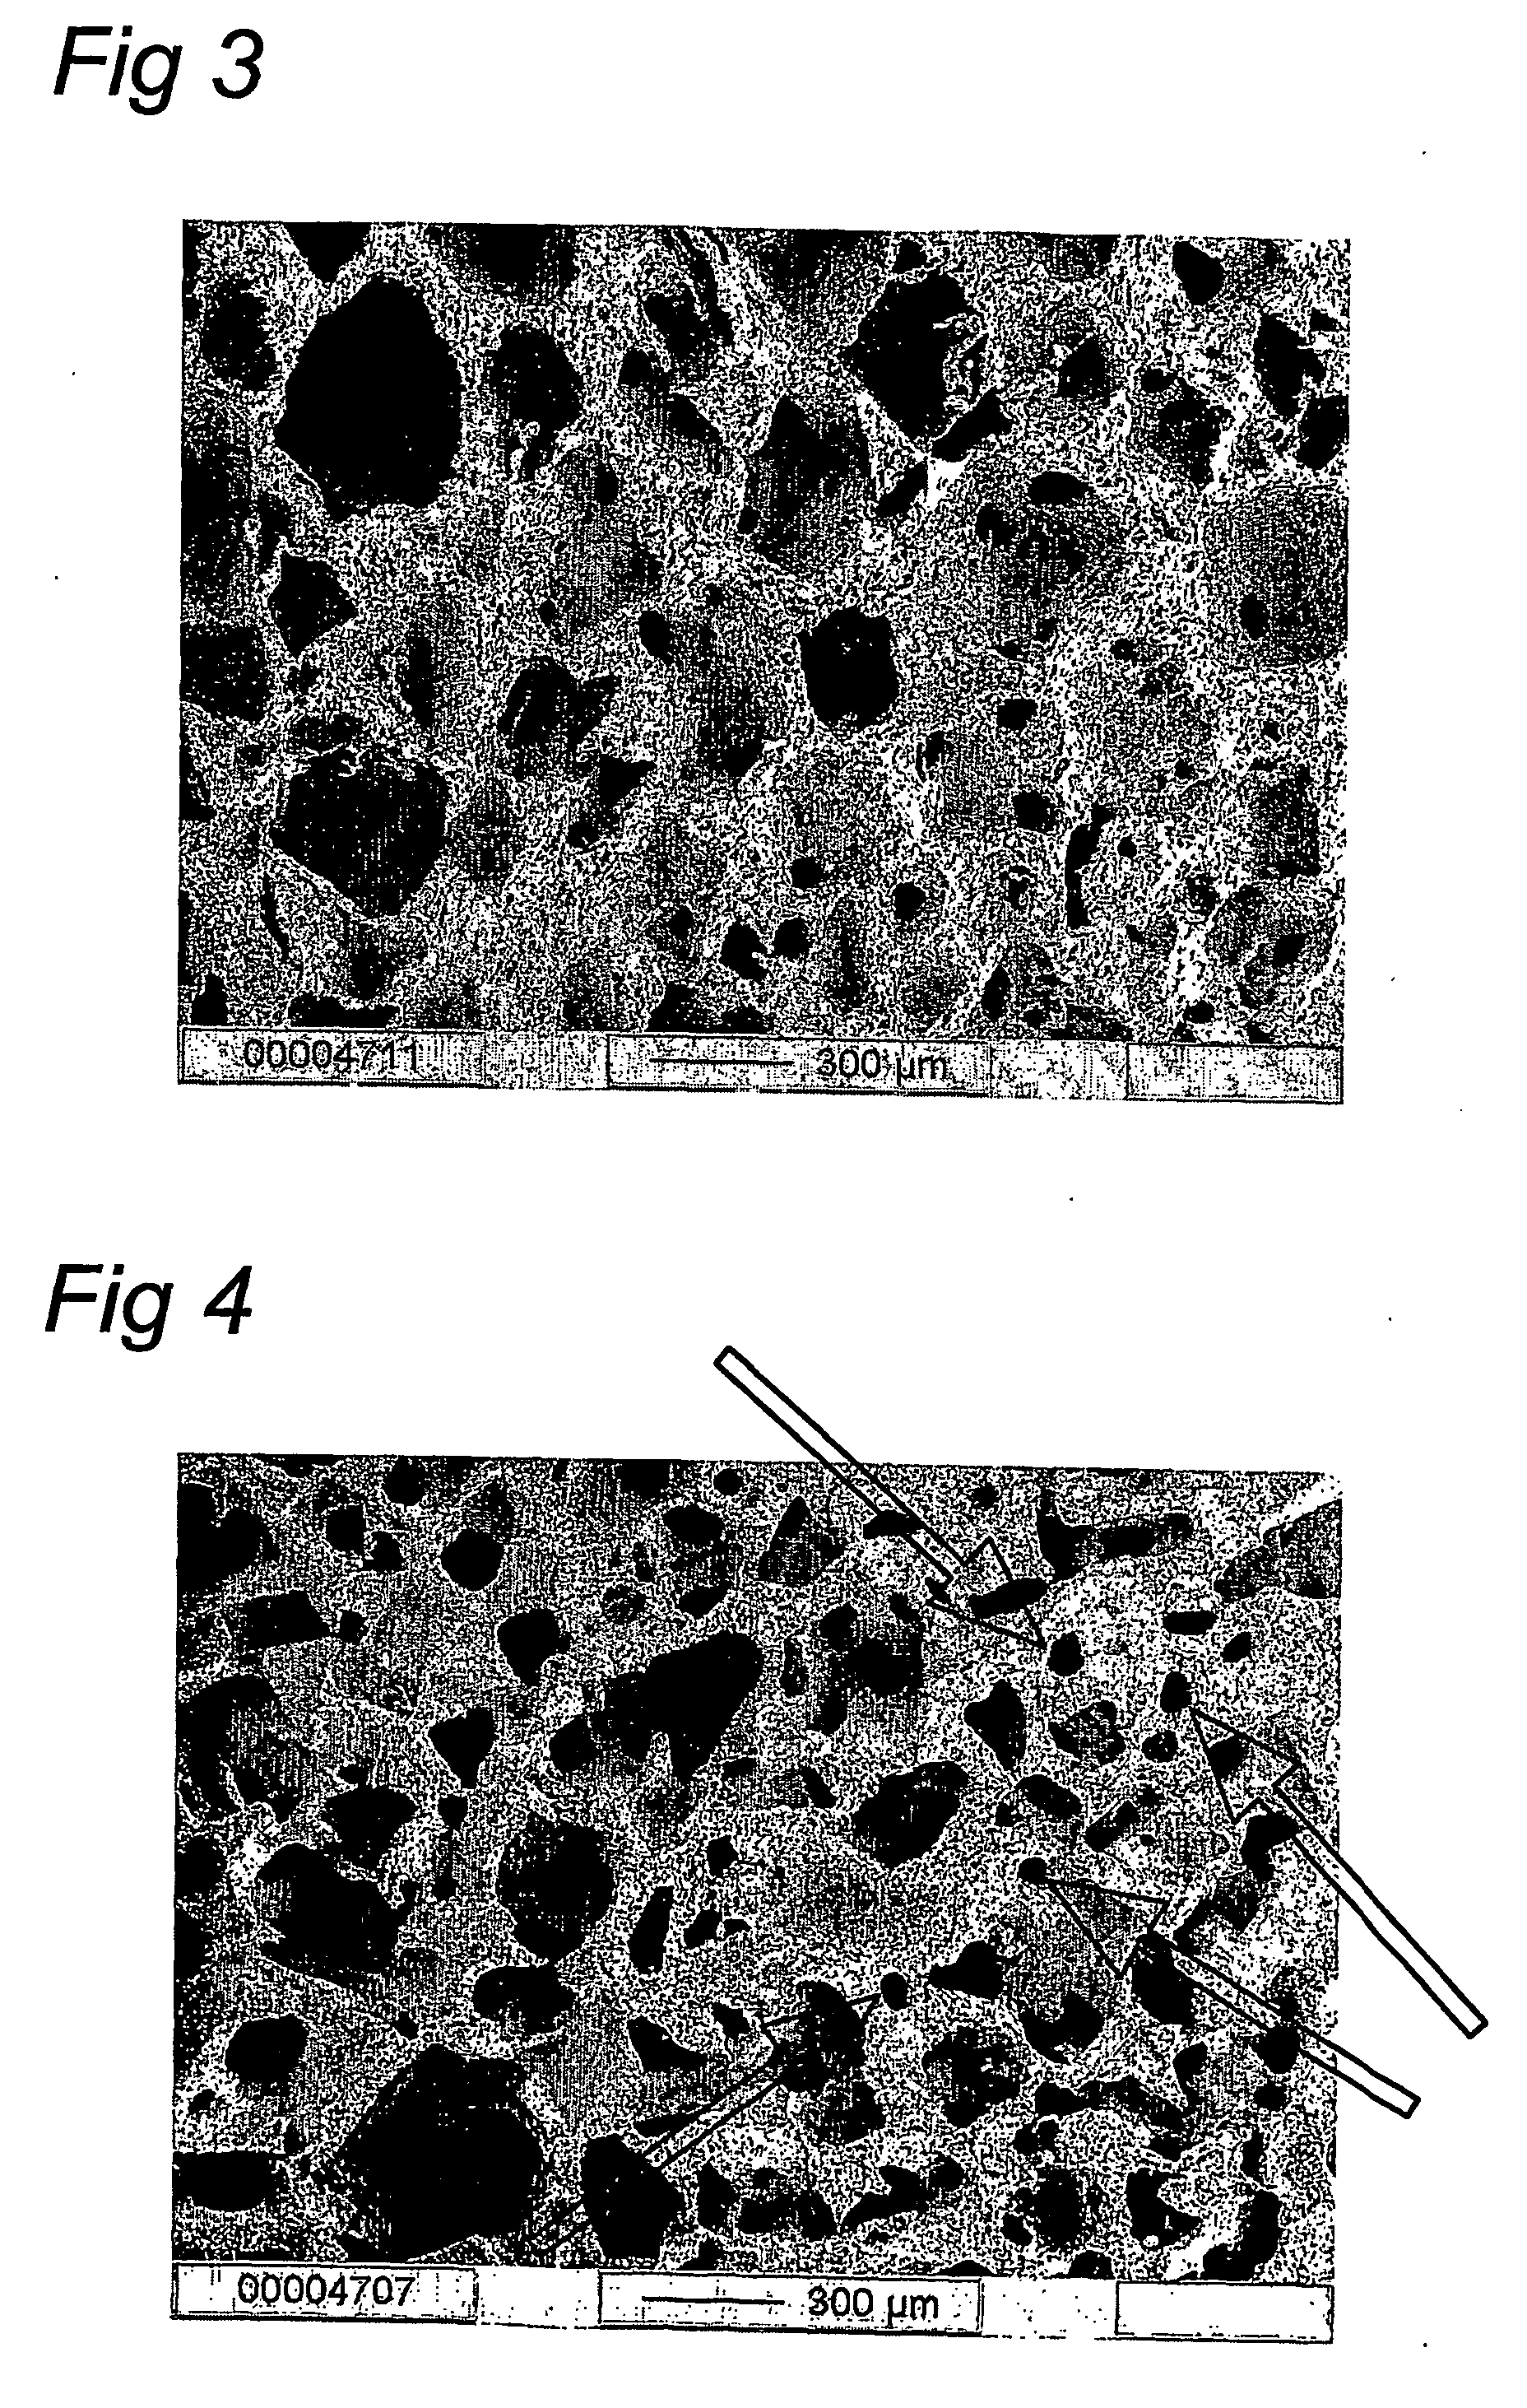 Method for the preparation of new segmented polyurethanes with high tear and tensile strengths and method for making porous scaffolds